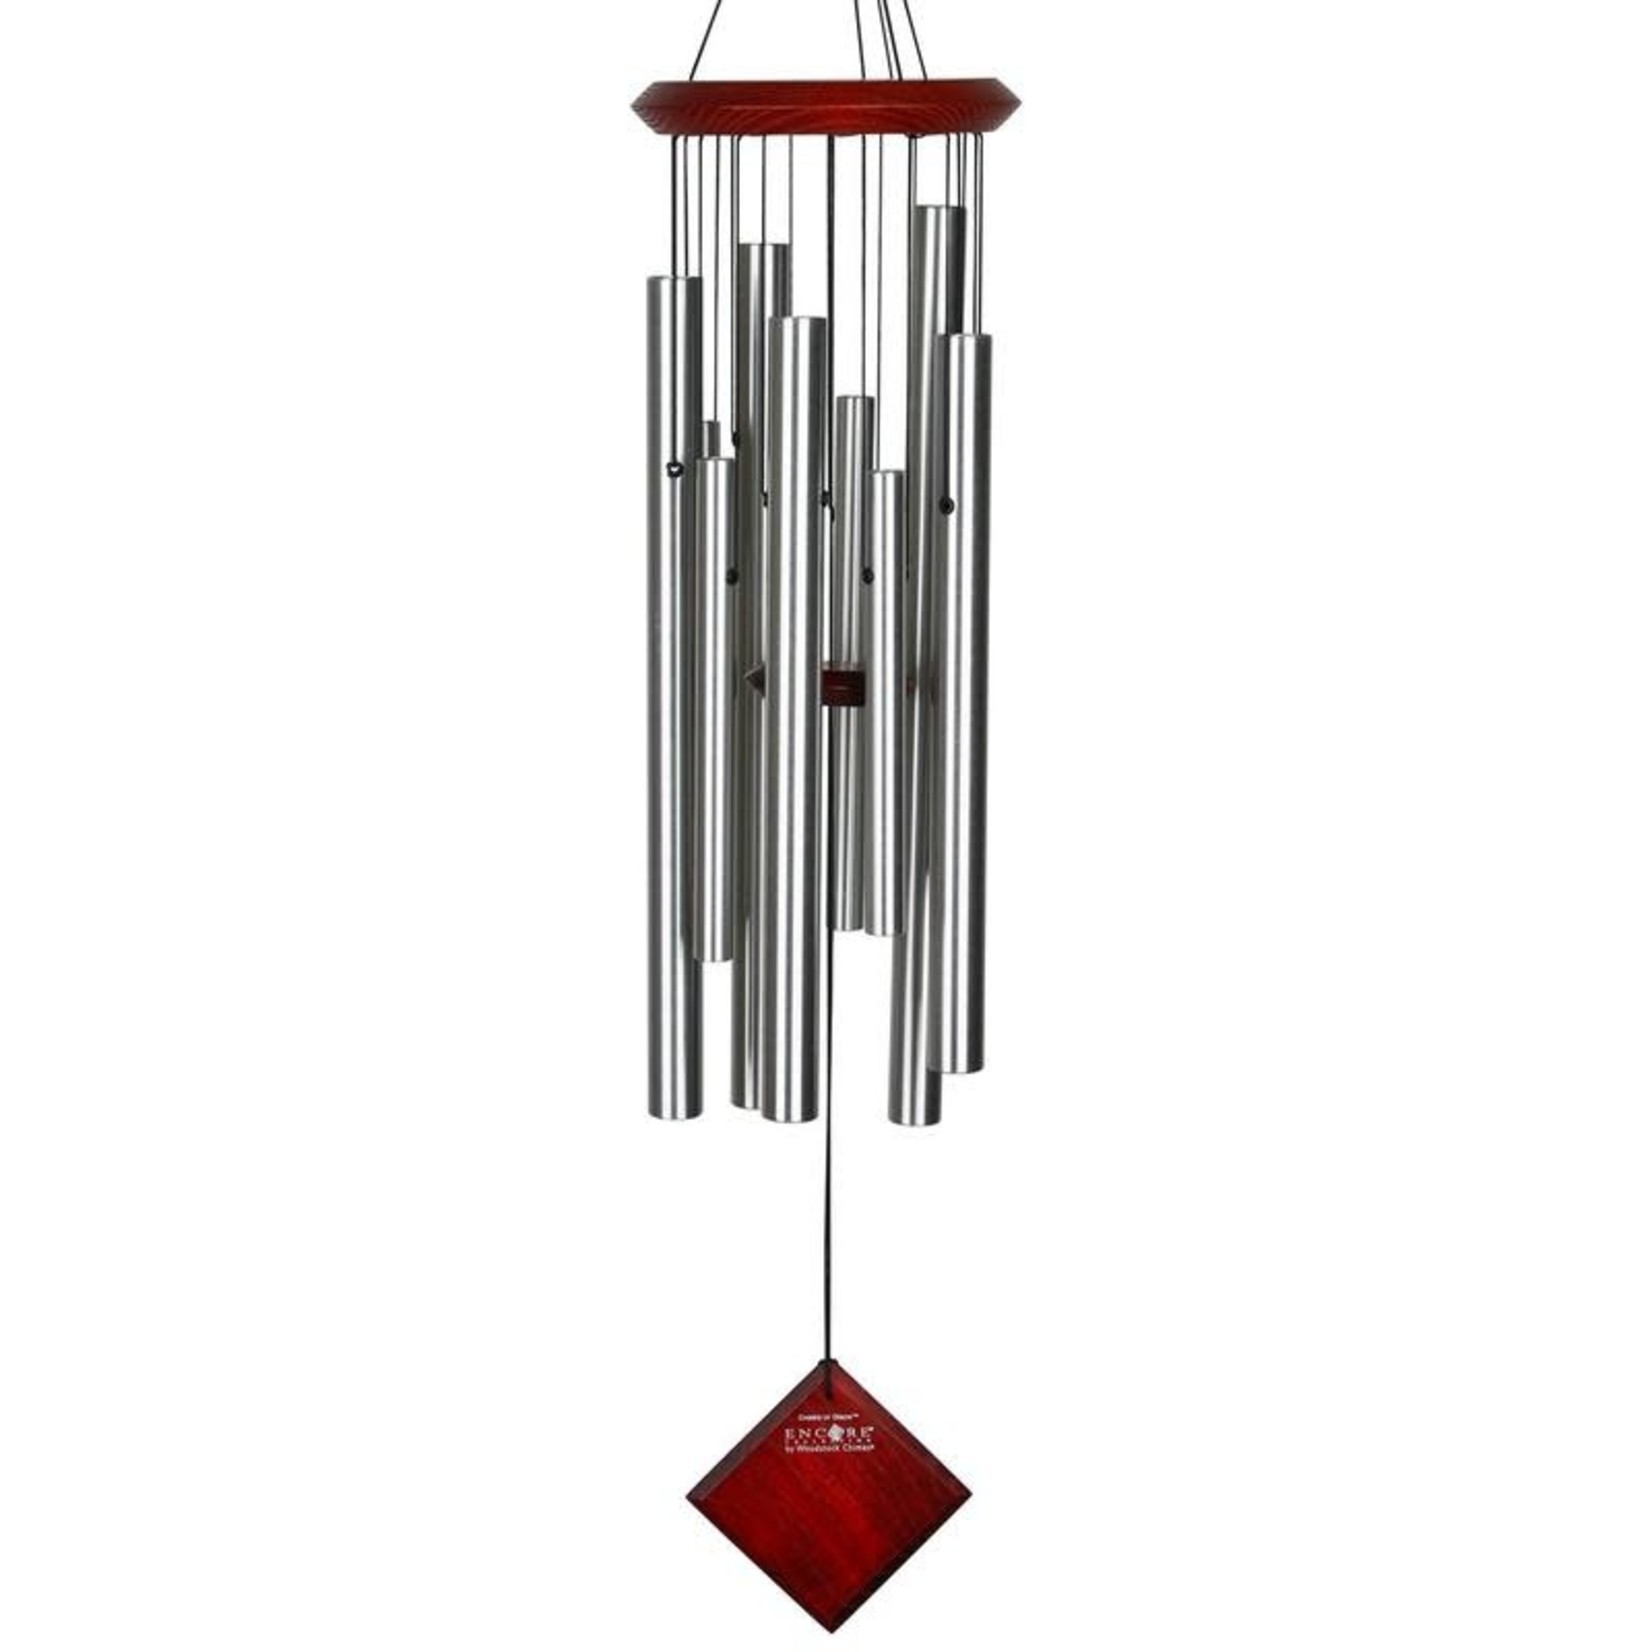 Woodstock Chimes CHIME of  Orion Silver Large